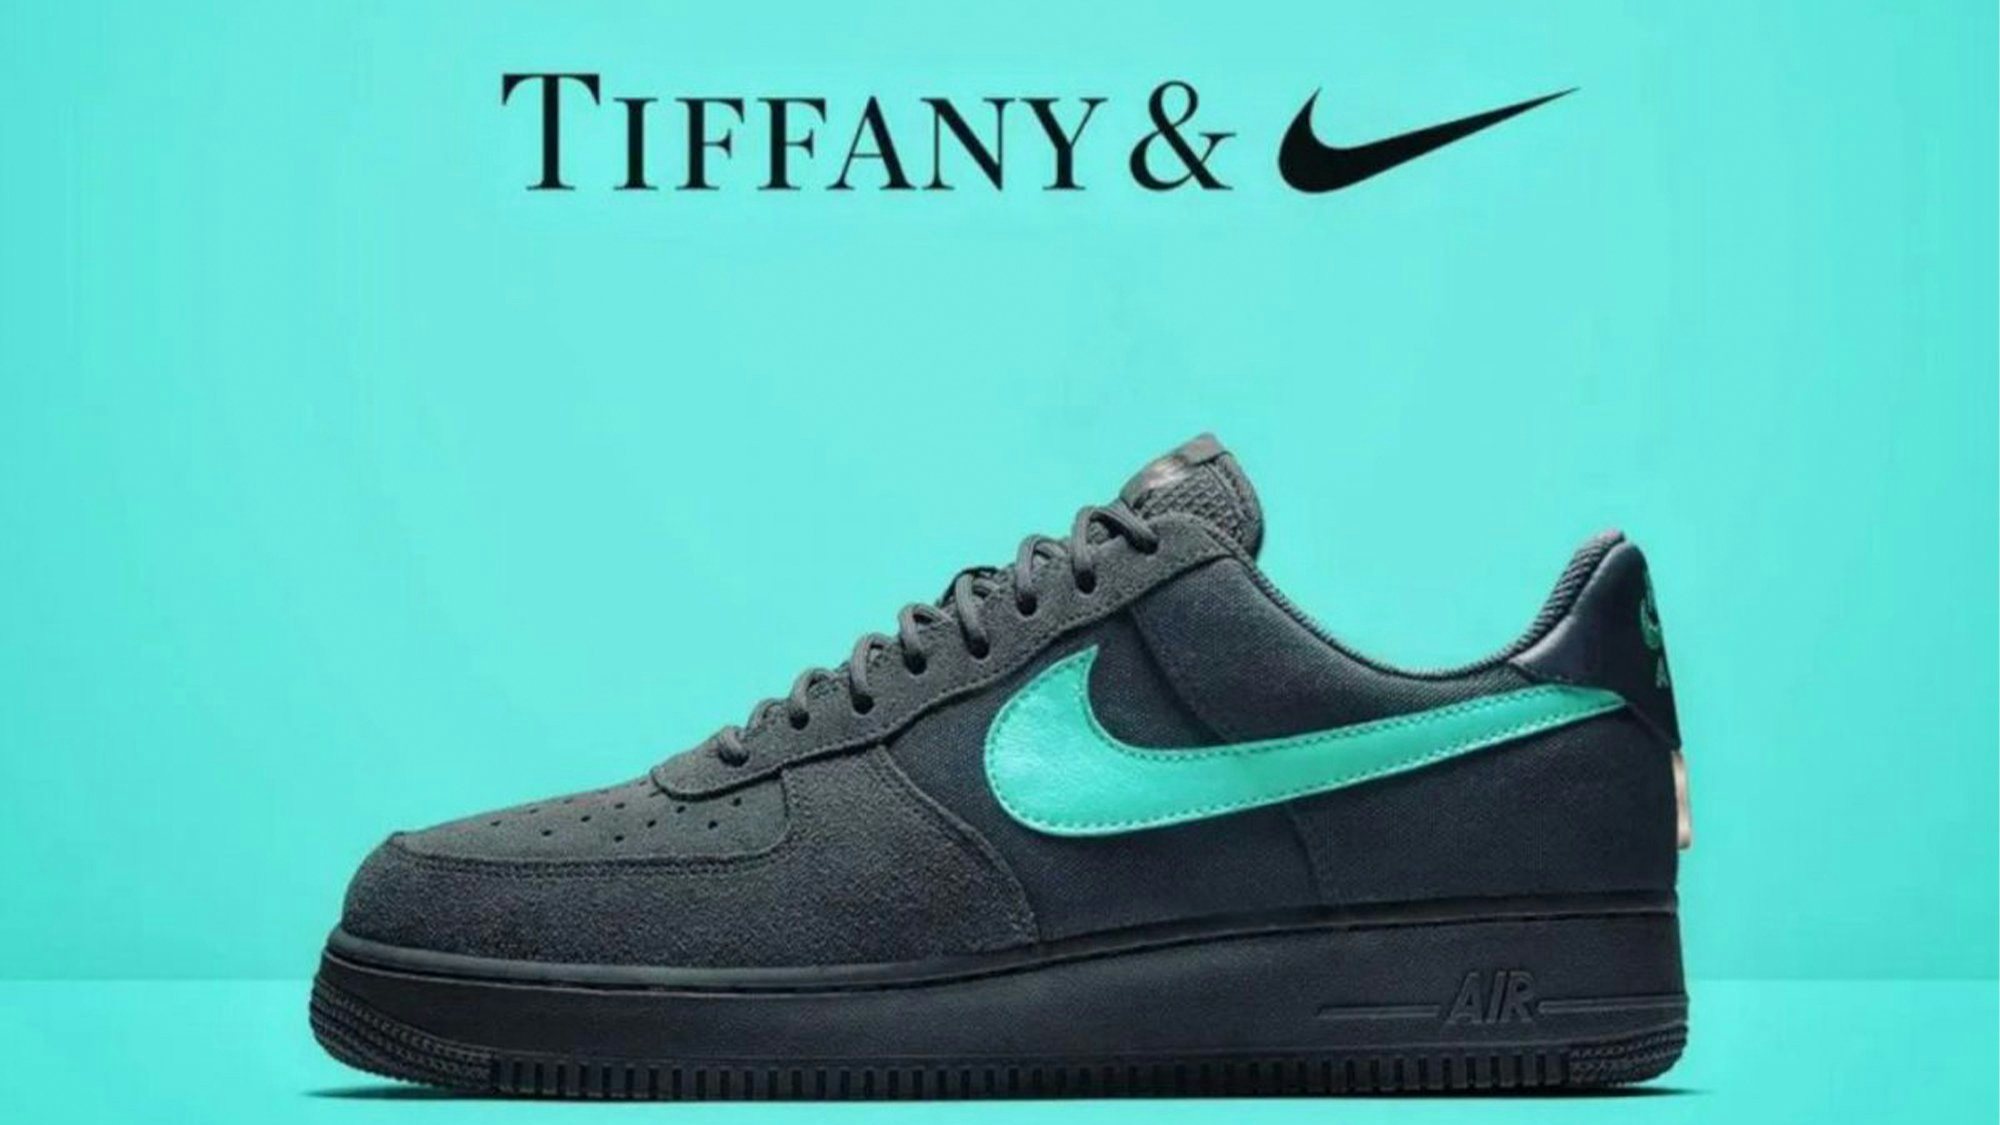 Tiffany and Nike's black and blue shoes are not impressing sneakerheads around the world so far. In China, the reception was tepid. Photo: Tiffany & Co.